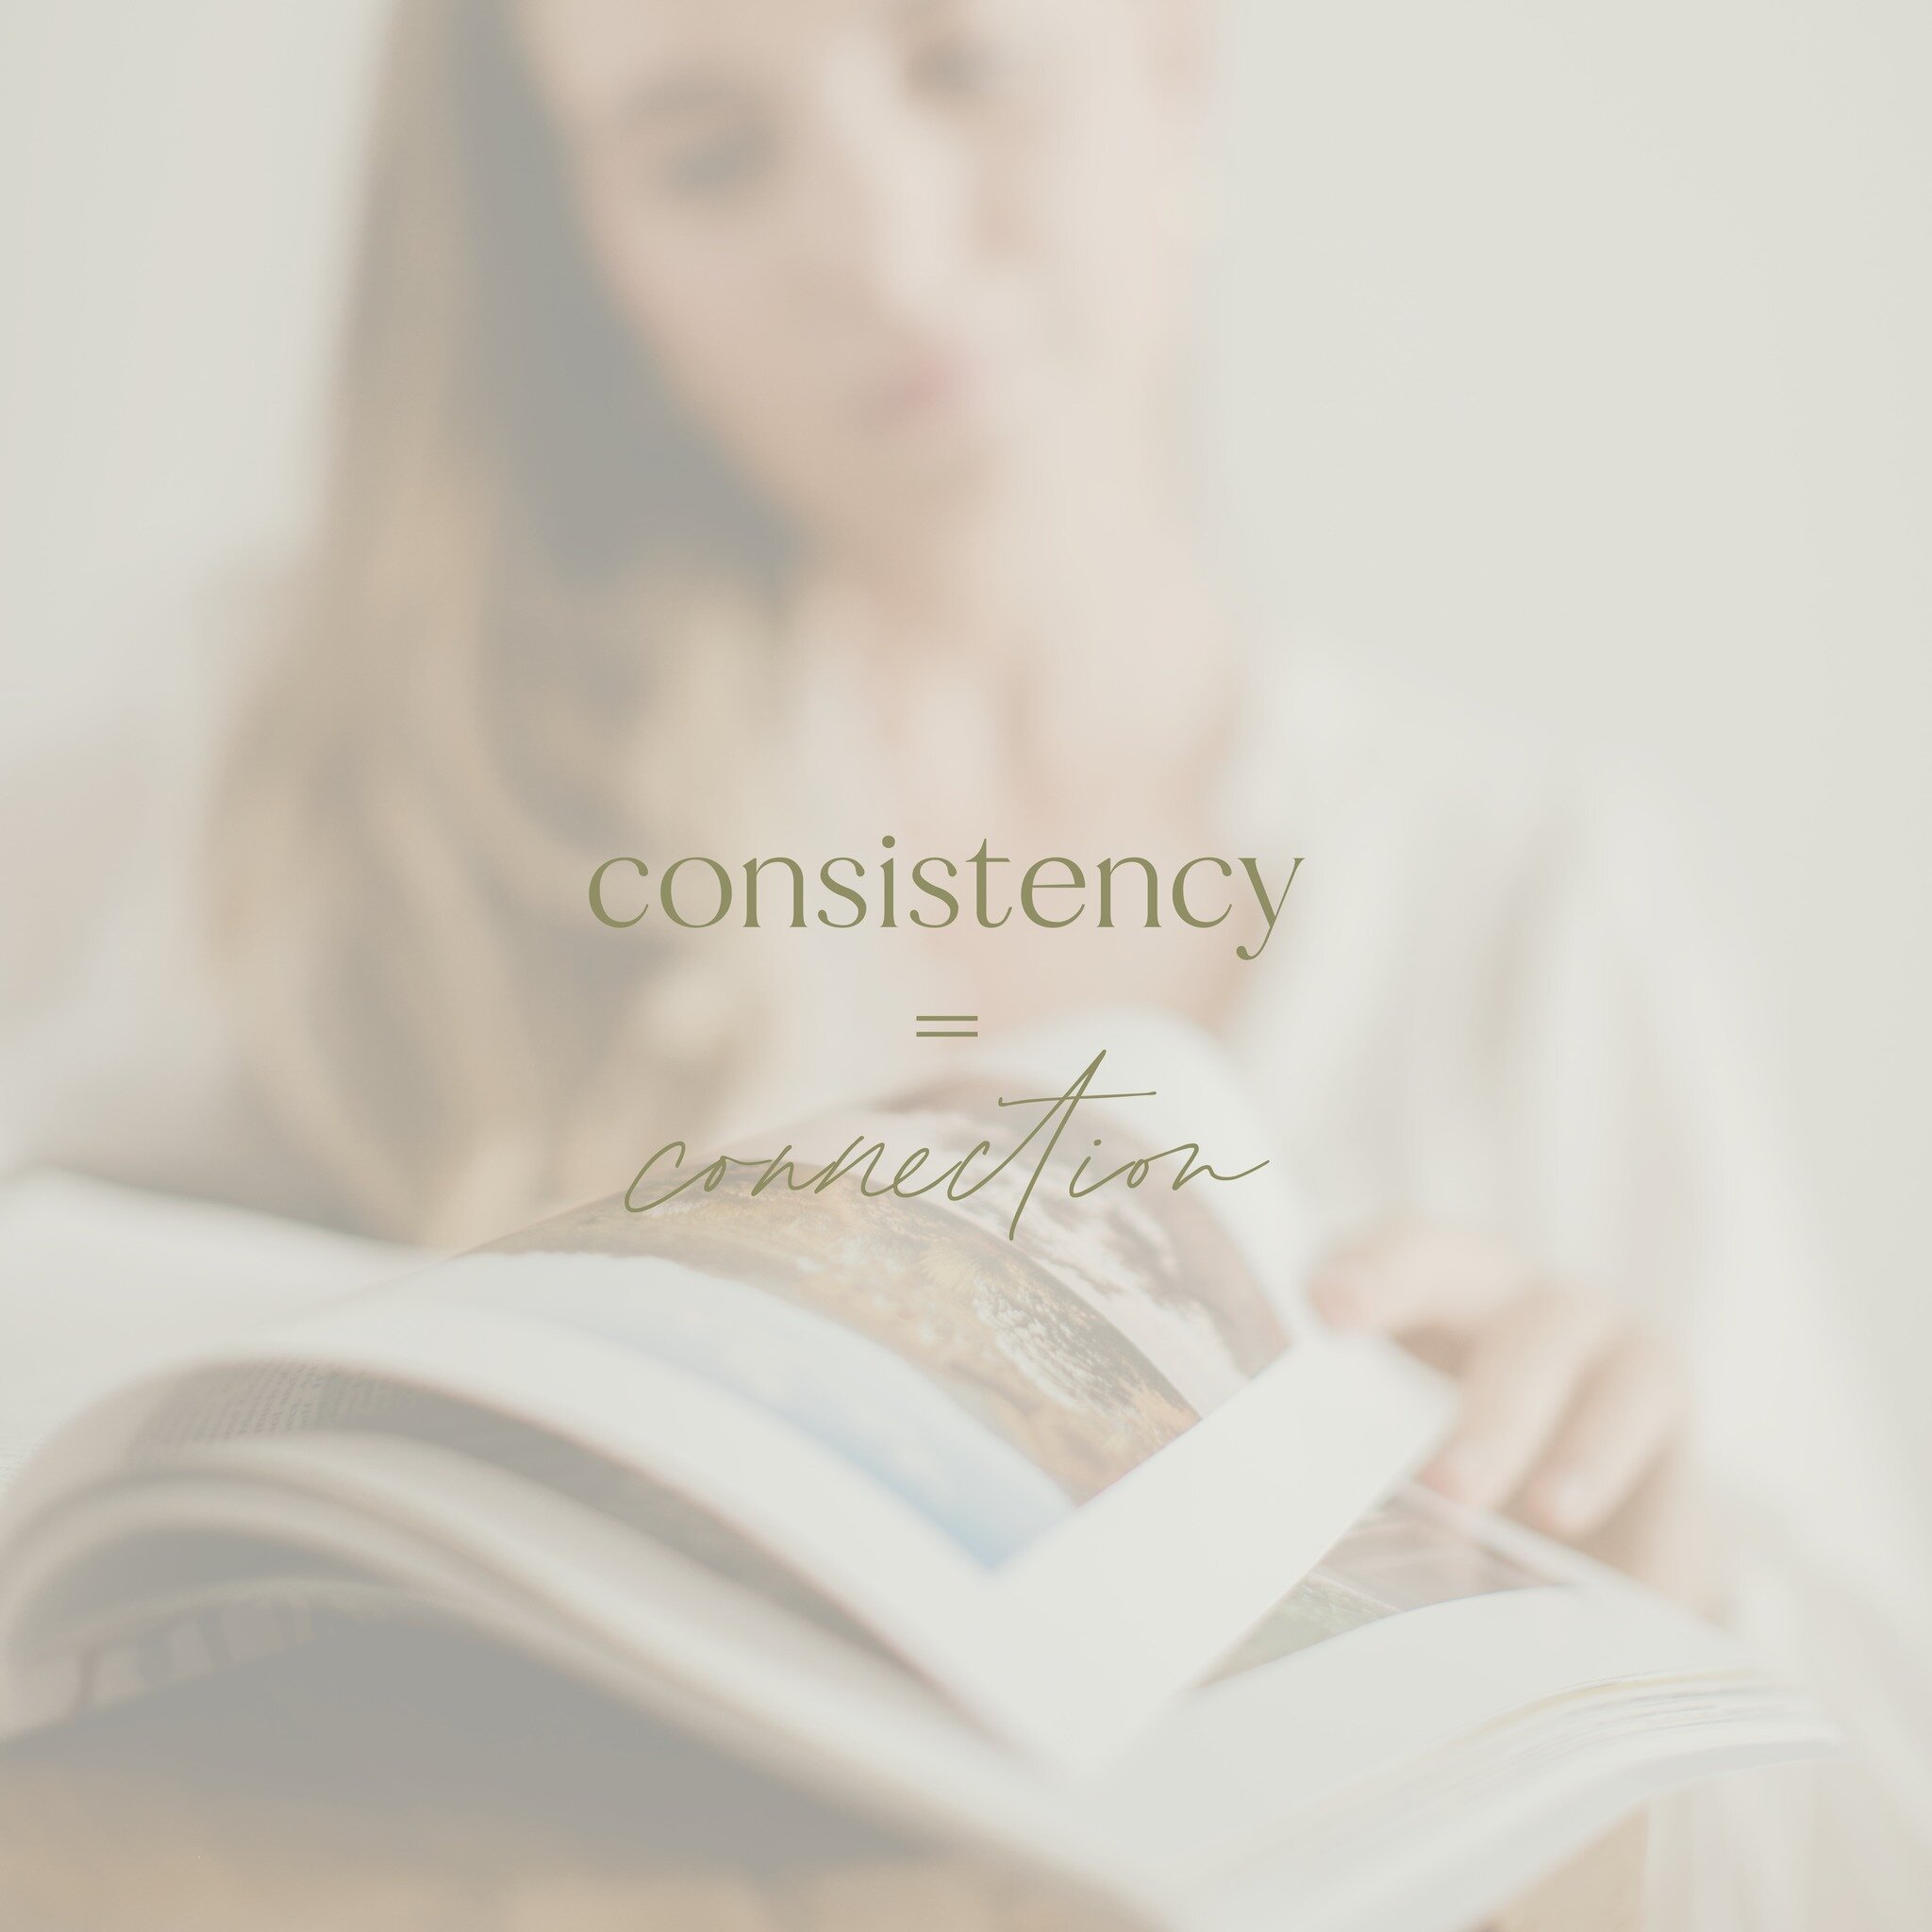 Consistency signals reliability and dependability ✔️ 

When your brand is consistent, your clients develop a sense of recognition and trust. Familiarity breeds comfort, and when people feel comfortable with your brand, they are more likely to connect